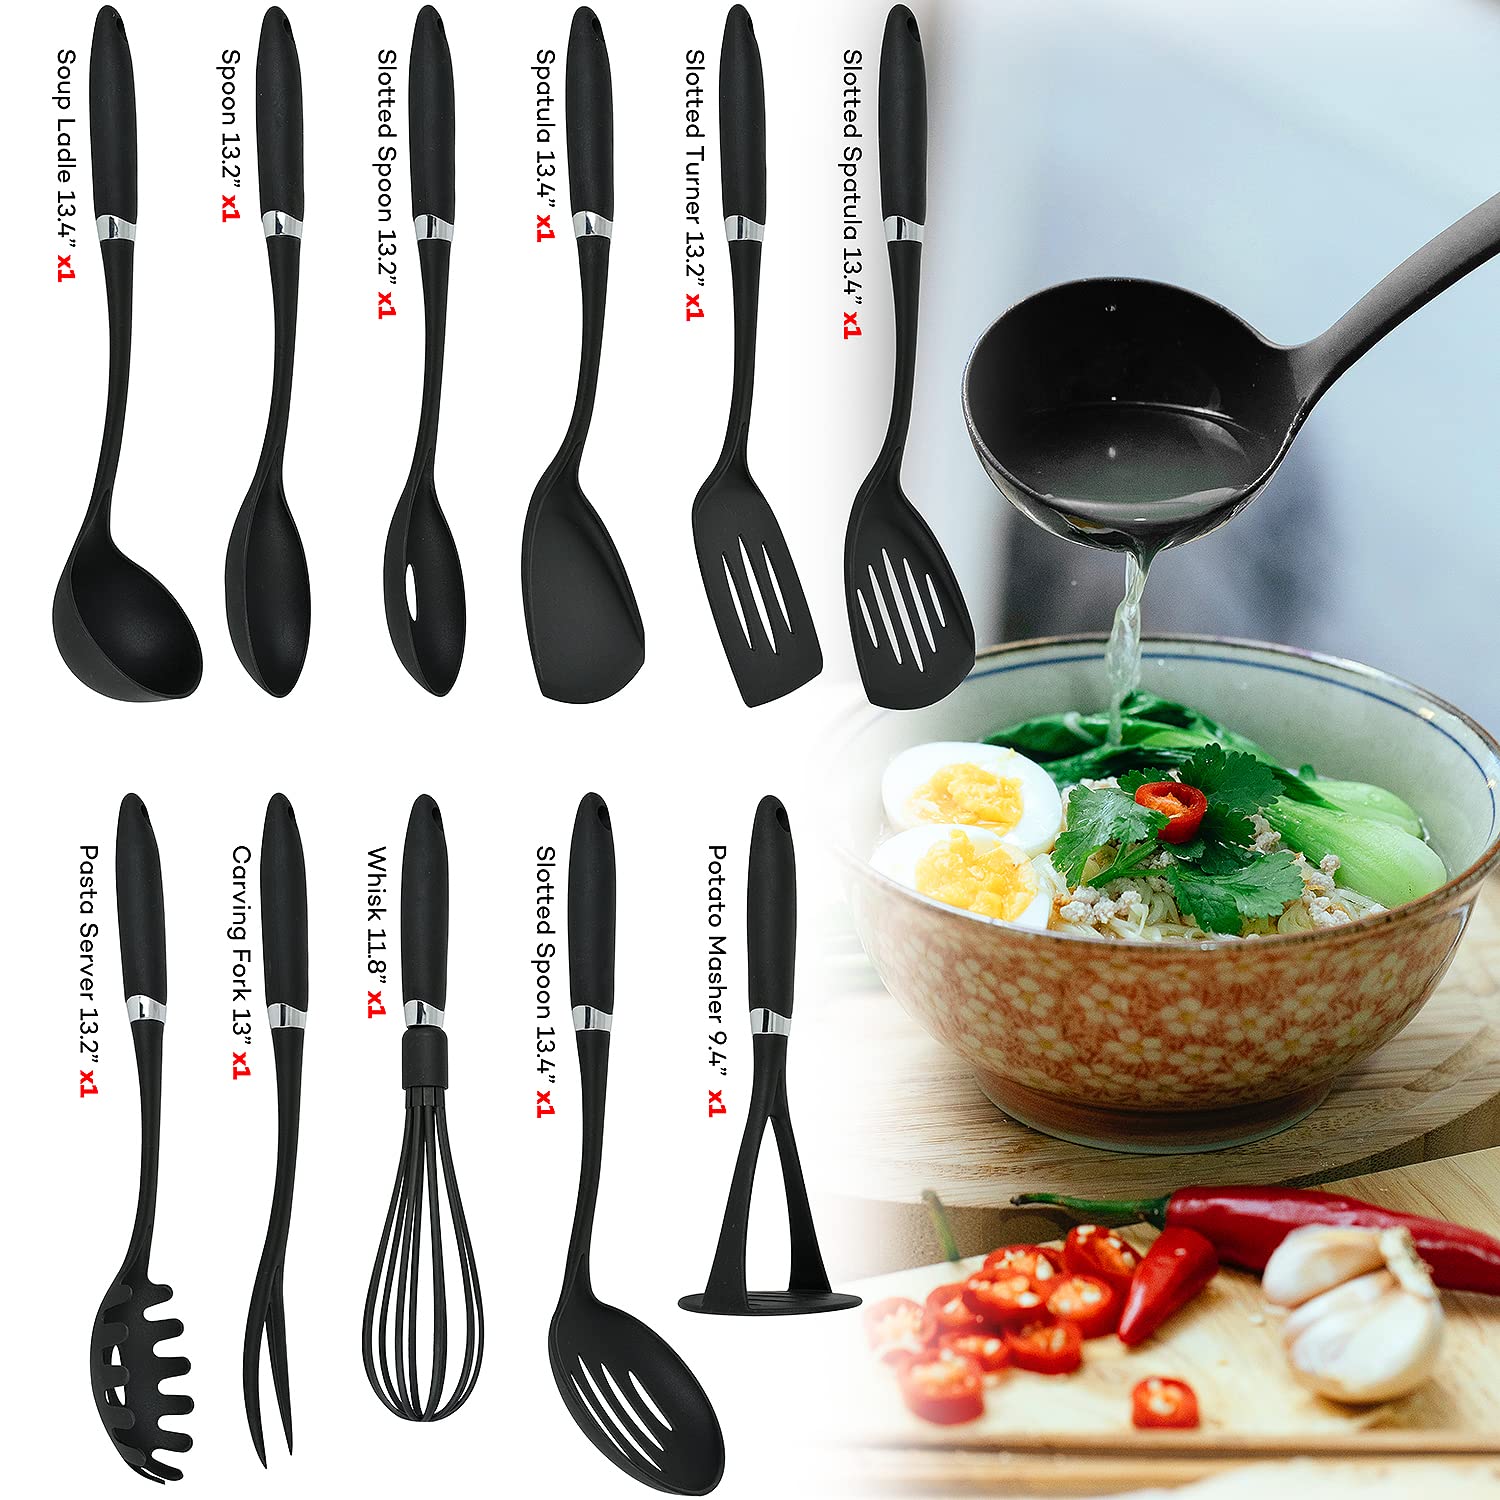 30 Pieces Knife Set and kitchen utensil set, silicone cooking utensils set for kitchen essentials with Knife Sharpener, 11 Pcs black knife set, Cutting Board essential knife and cutting board set